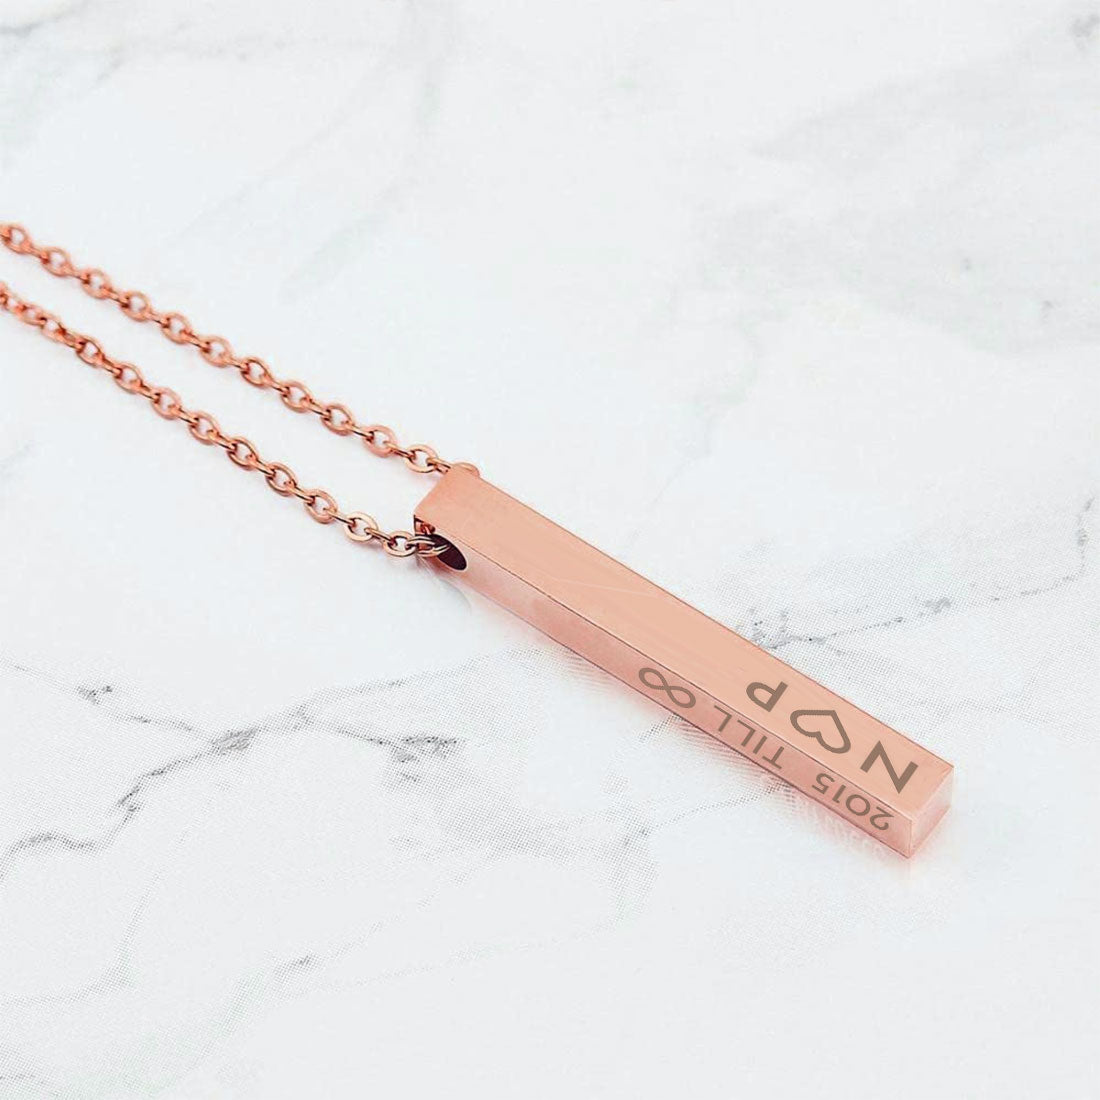 Personalized Jewelery Pendant Engraved Necklace for Her - Infinity